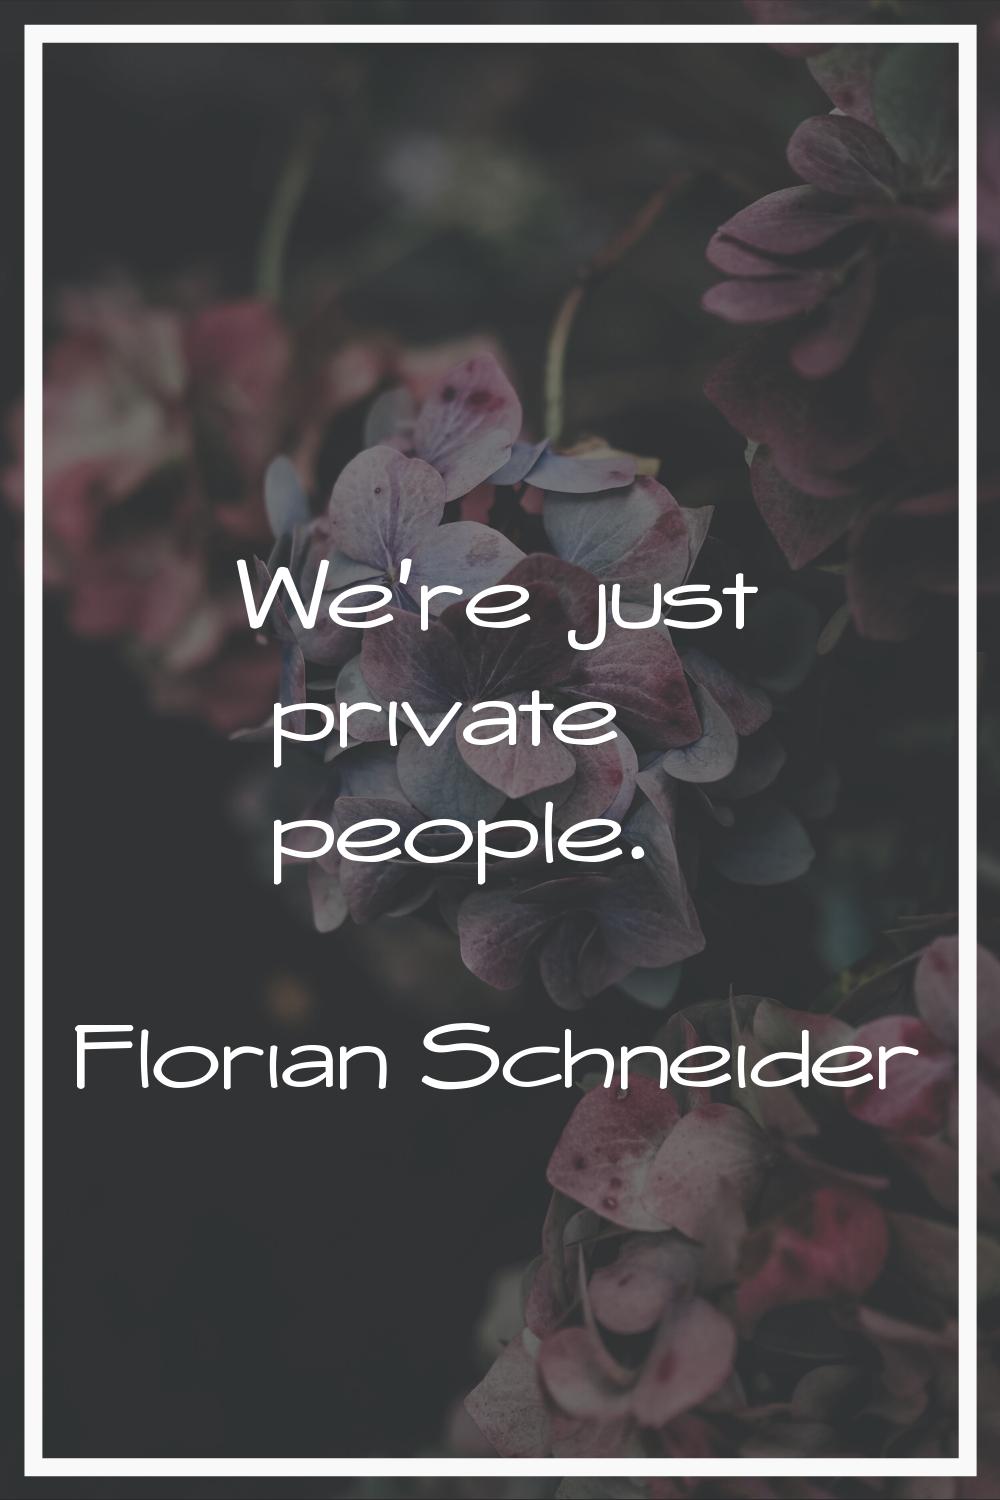 We're just private people.